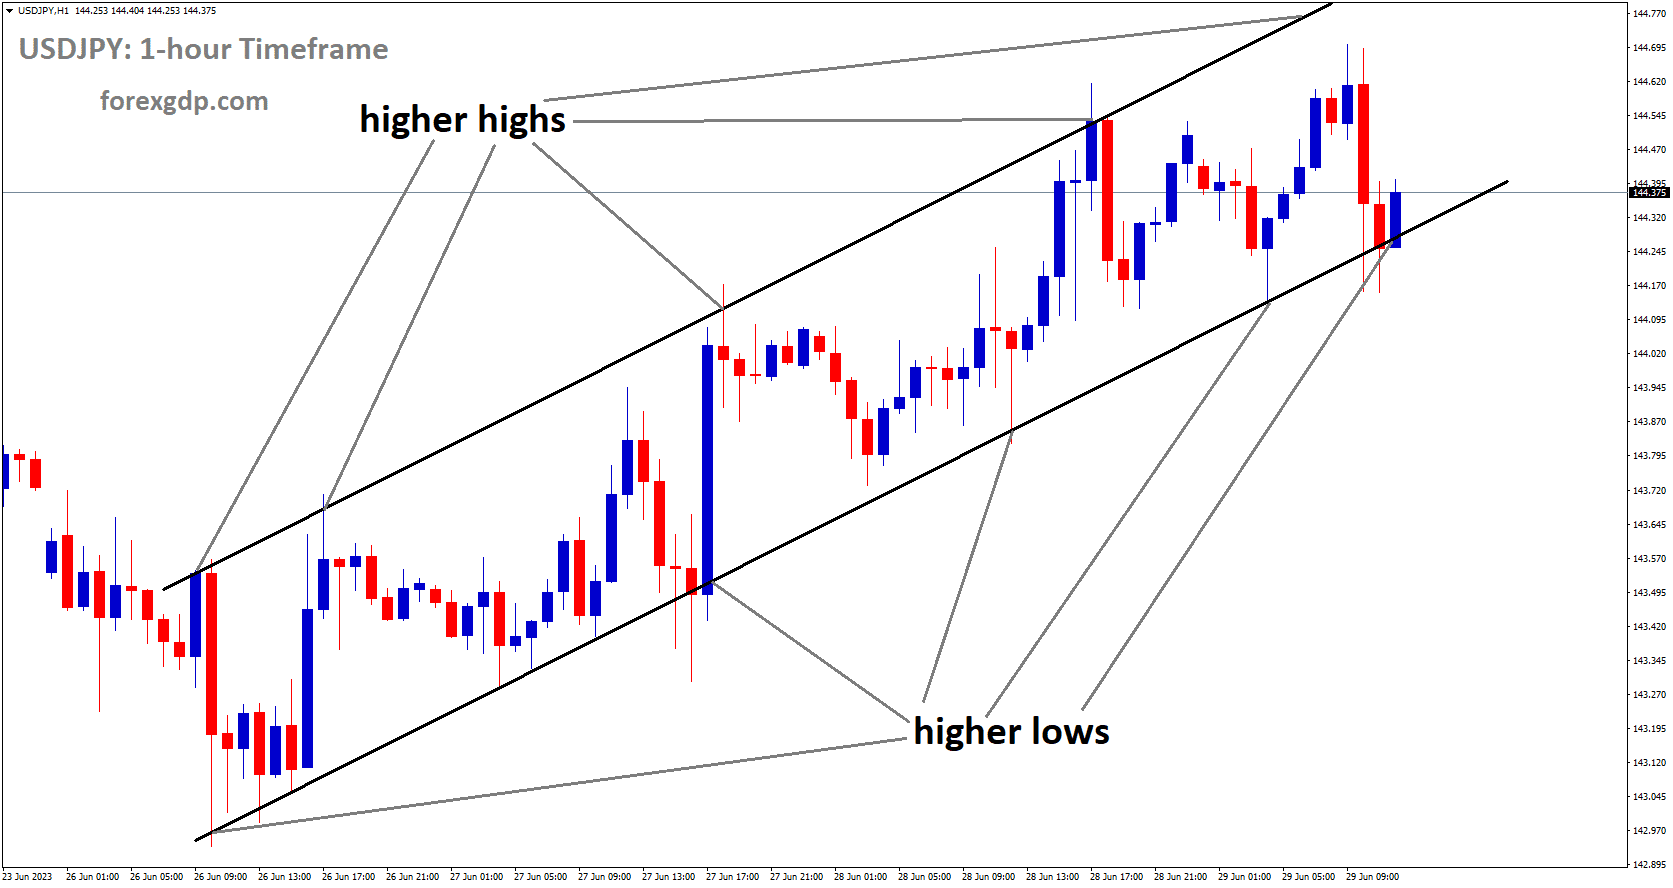 USDJPY is moving an Ascending channel and the market has reached the higher low area of the channel.